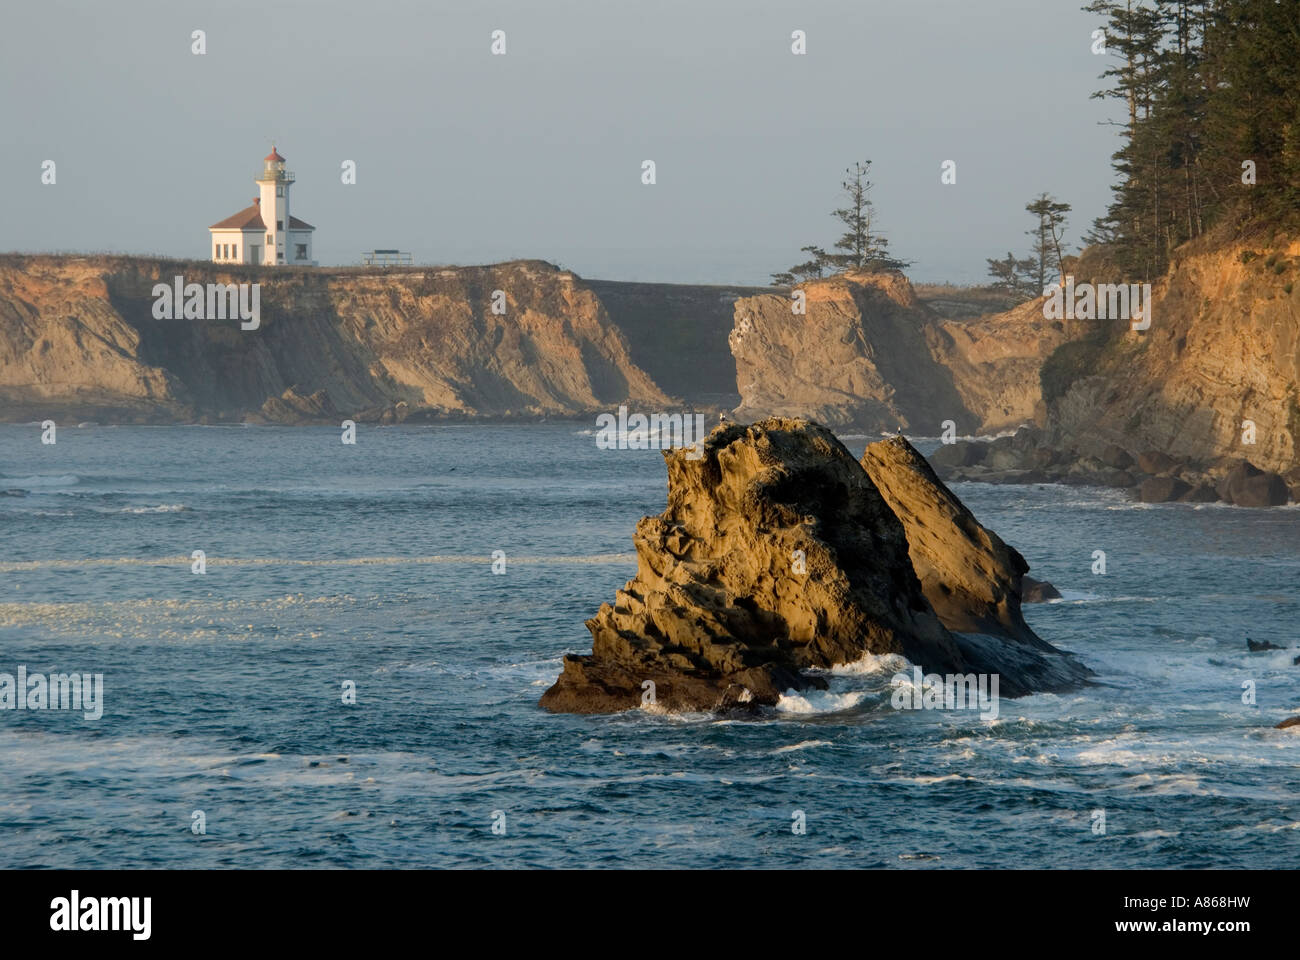 Cape Arago Lighthouse overlooking Sunset cove near Charleston, Oregon in the United States of America. Stock Photo